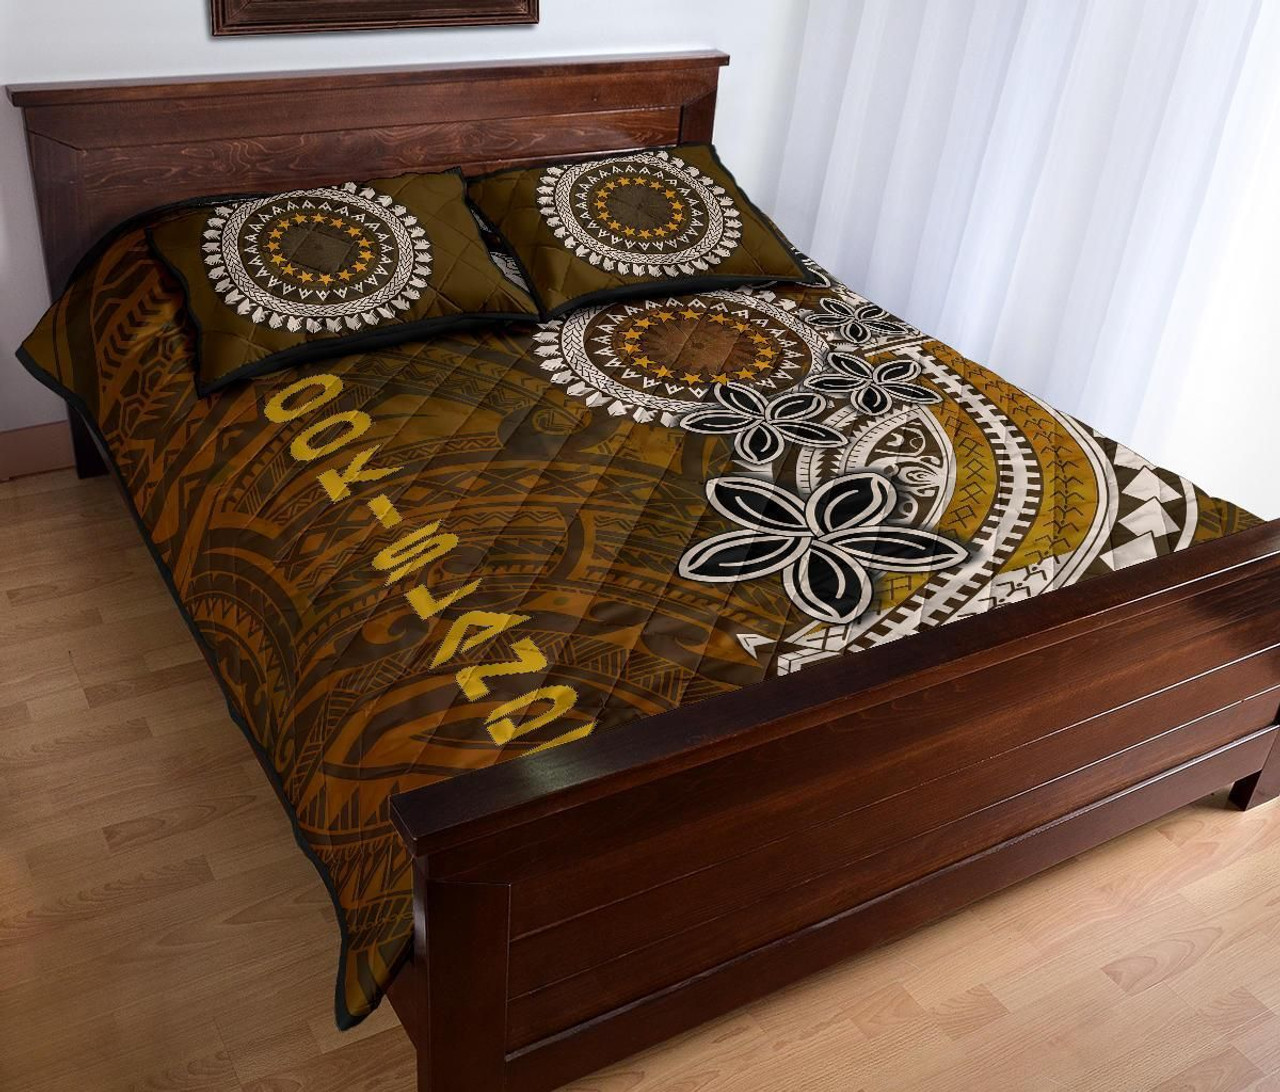 Cook Islands Quilt Bed Sets - Polynesian Boar Tusk 1